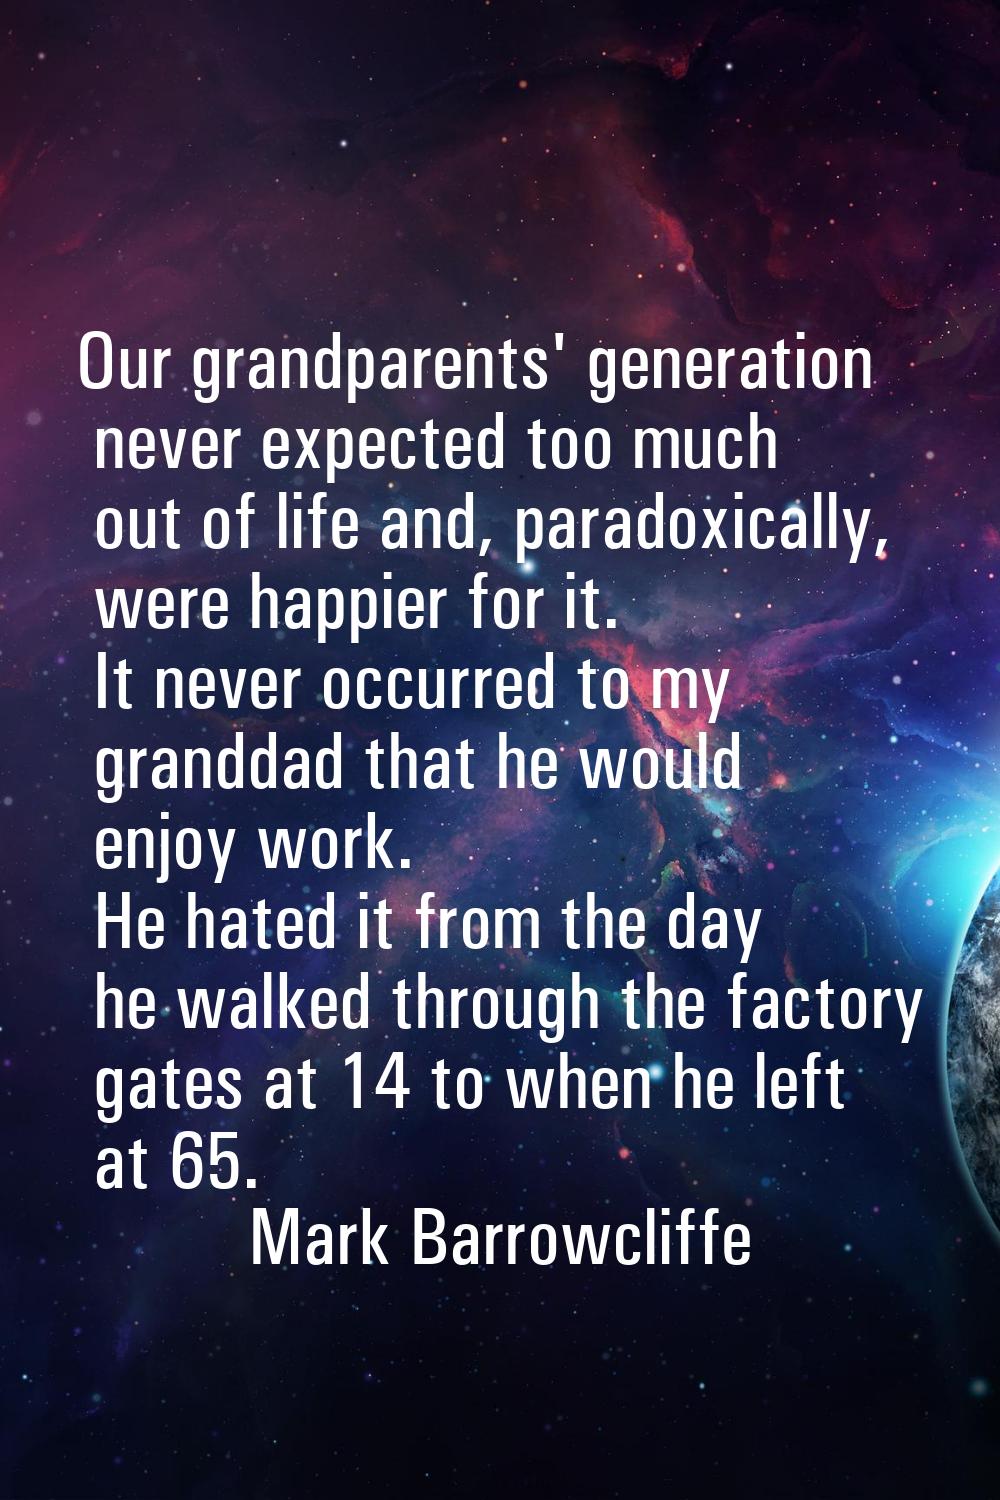 Our grandparents' generation never expected too much out of life and, paradoxically, were happier f